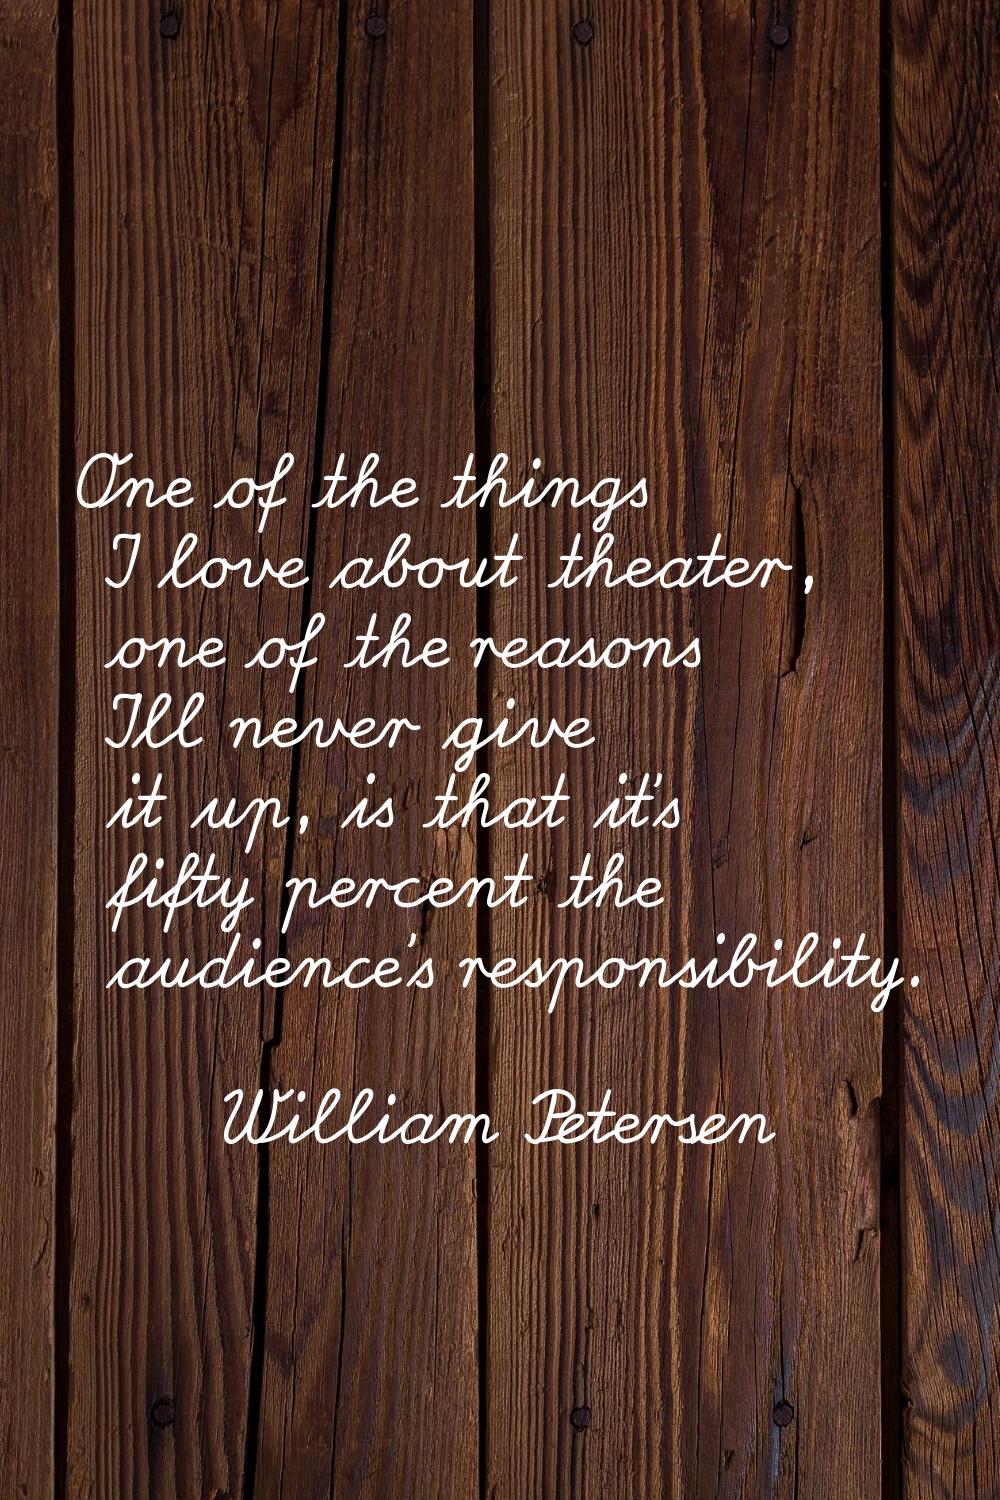 One of the things I love about theater, one of the reasons I'll never give it up, is that it's fift